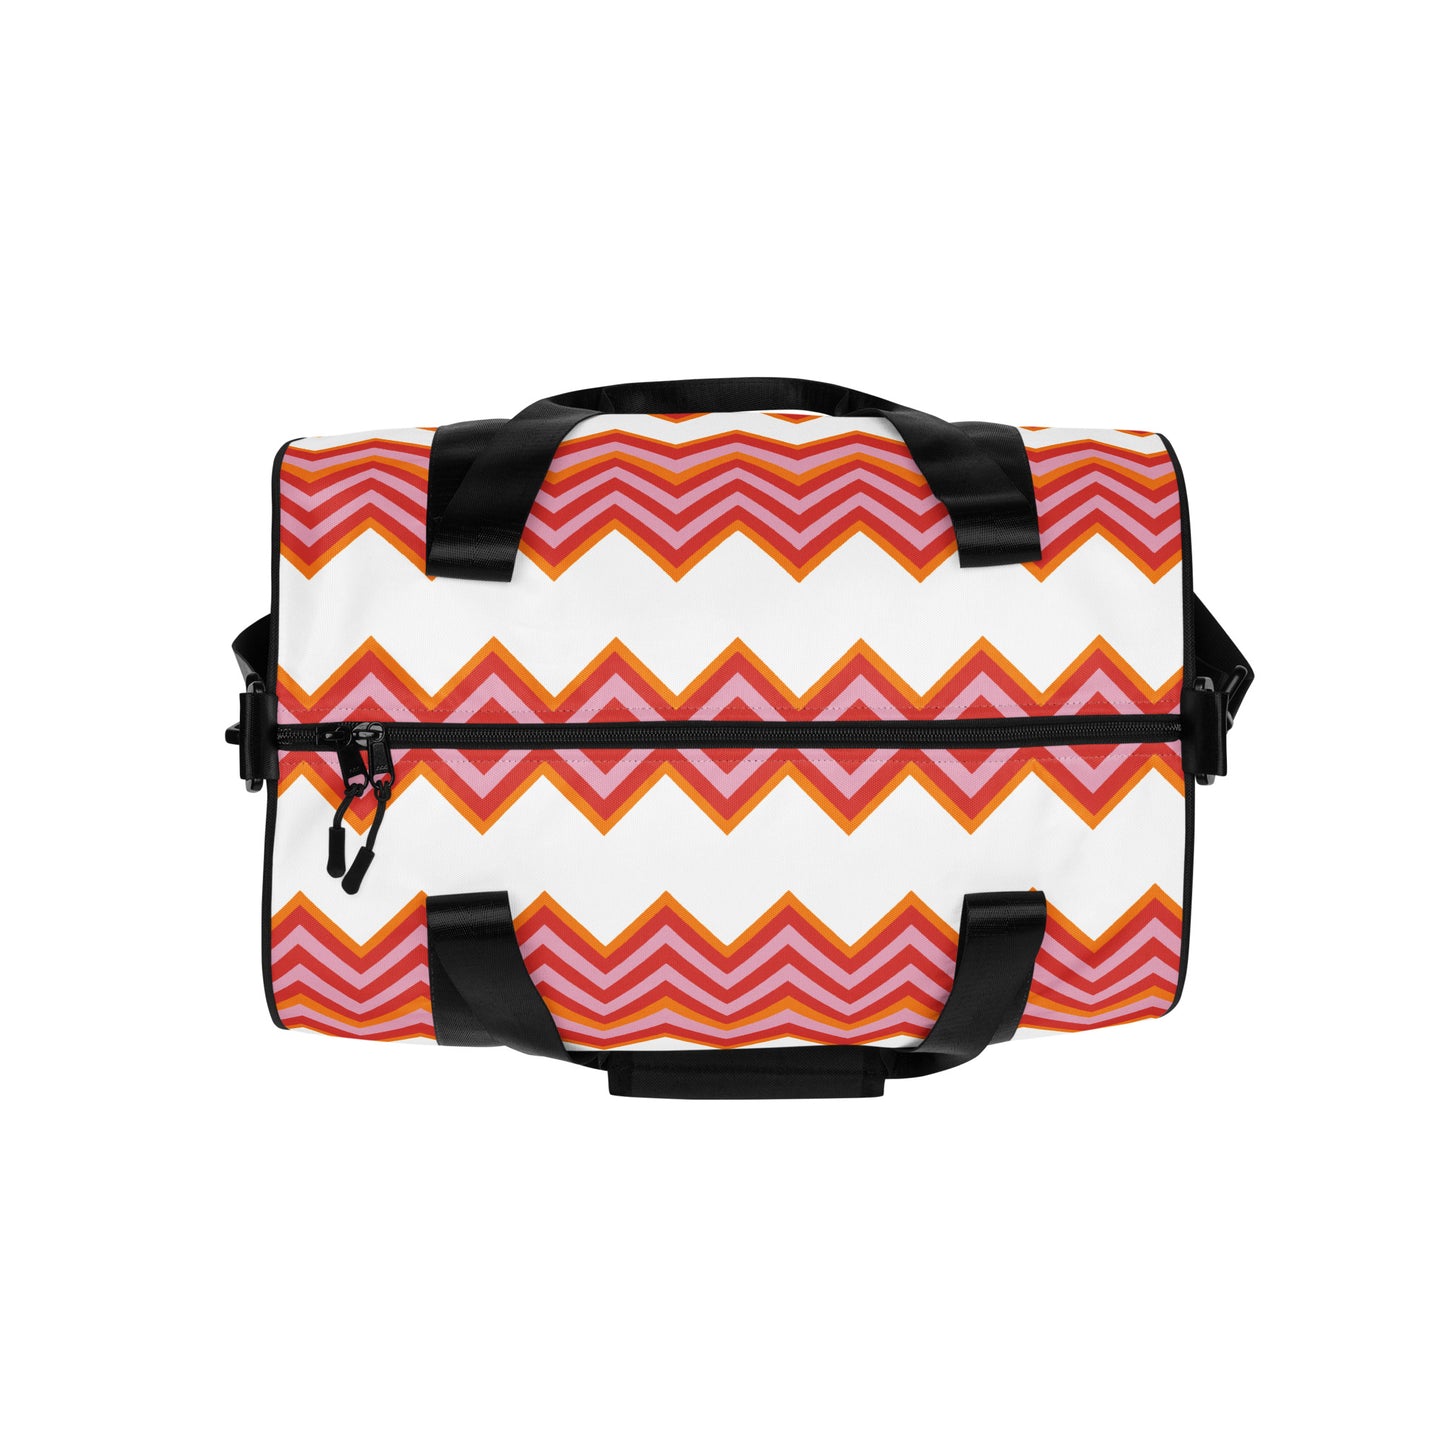 Retro Zigzag - Inspired By Taylor Swift - Sustainably Made gym bag